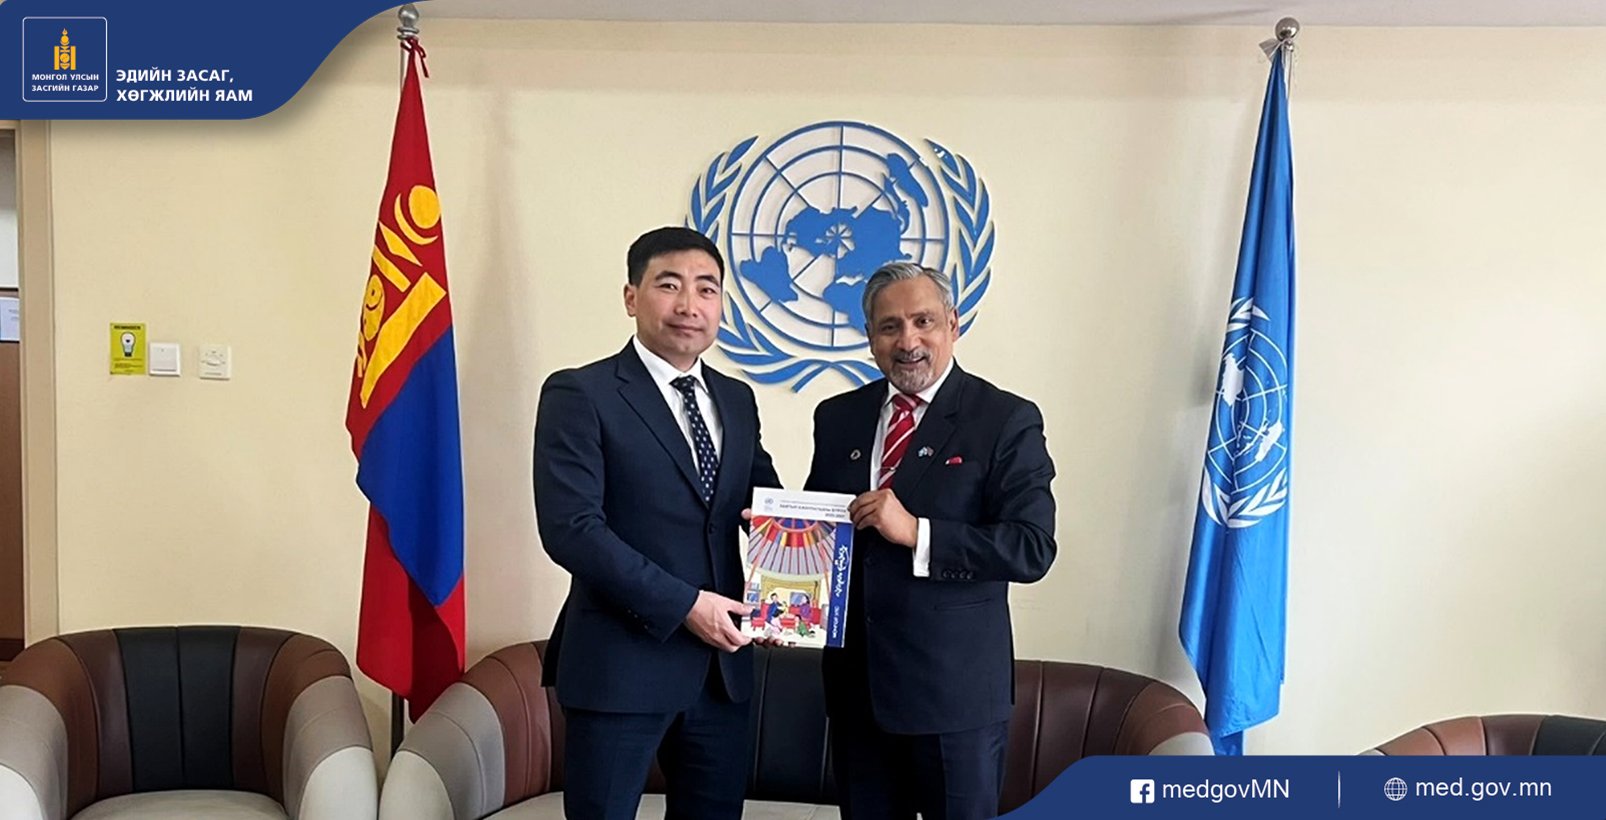 Acting State Secretary of Ministry of Economy and Development B. Dashpurev met Mr. Tapan Mishra, the UN Resident Coordinator in Mongolia.